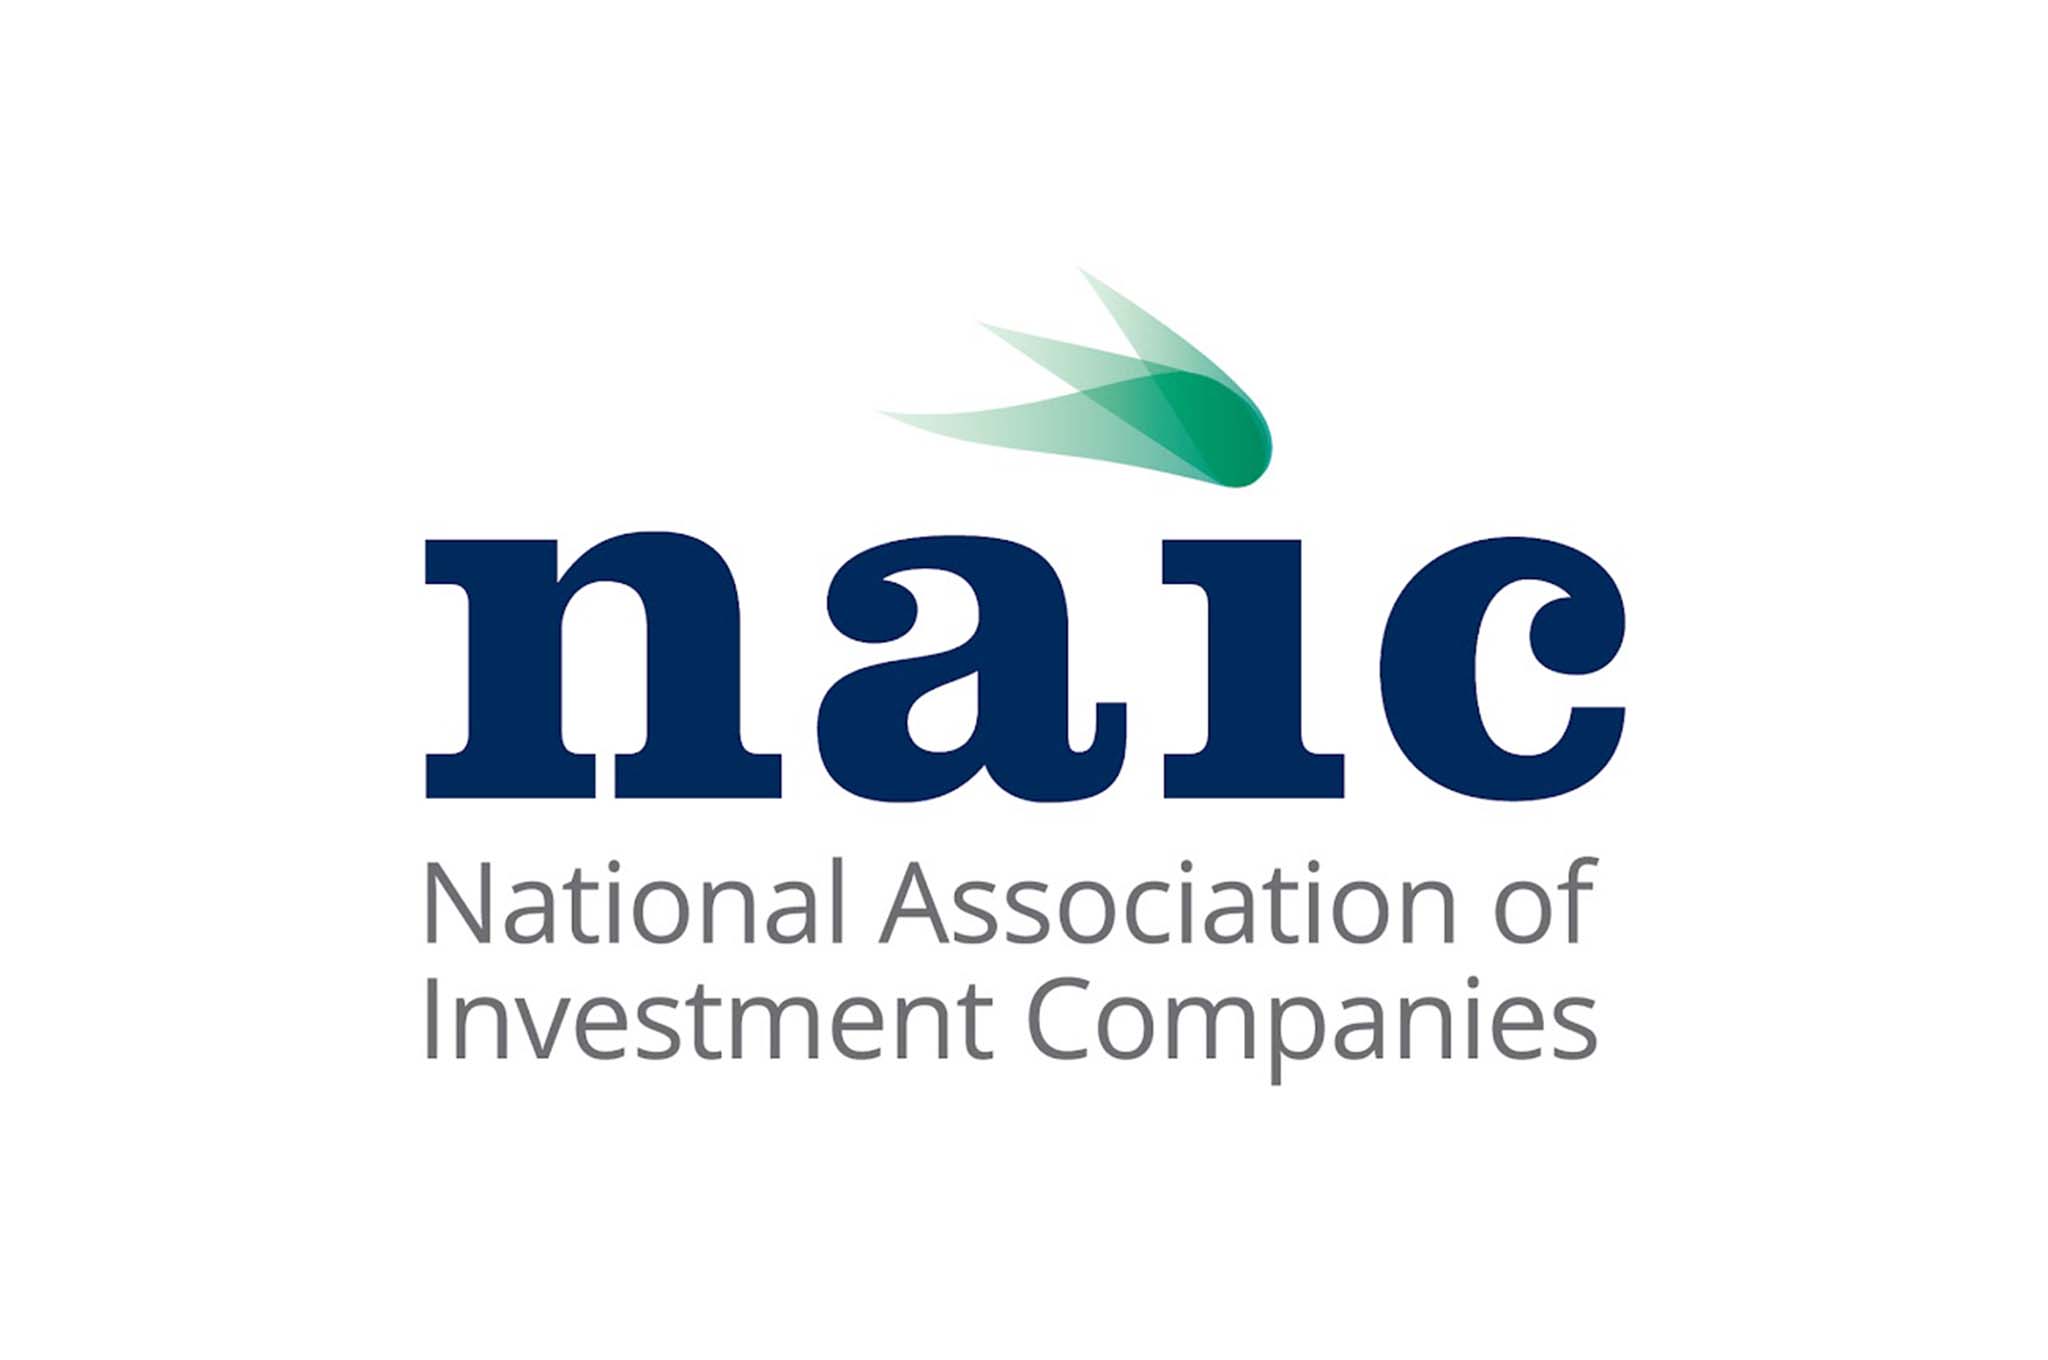 National Association of Investment Companies logo